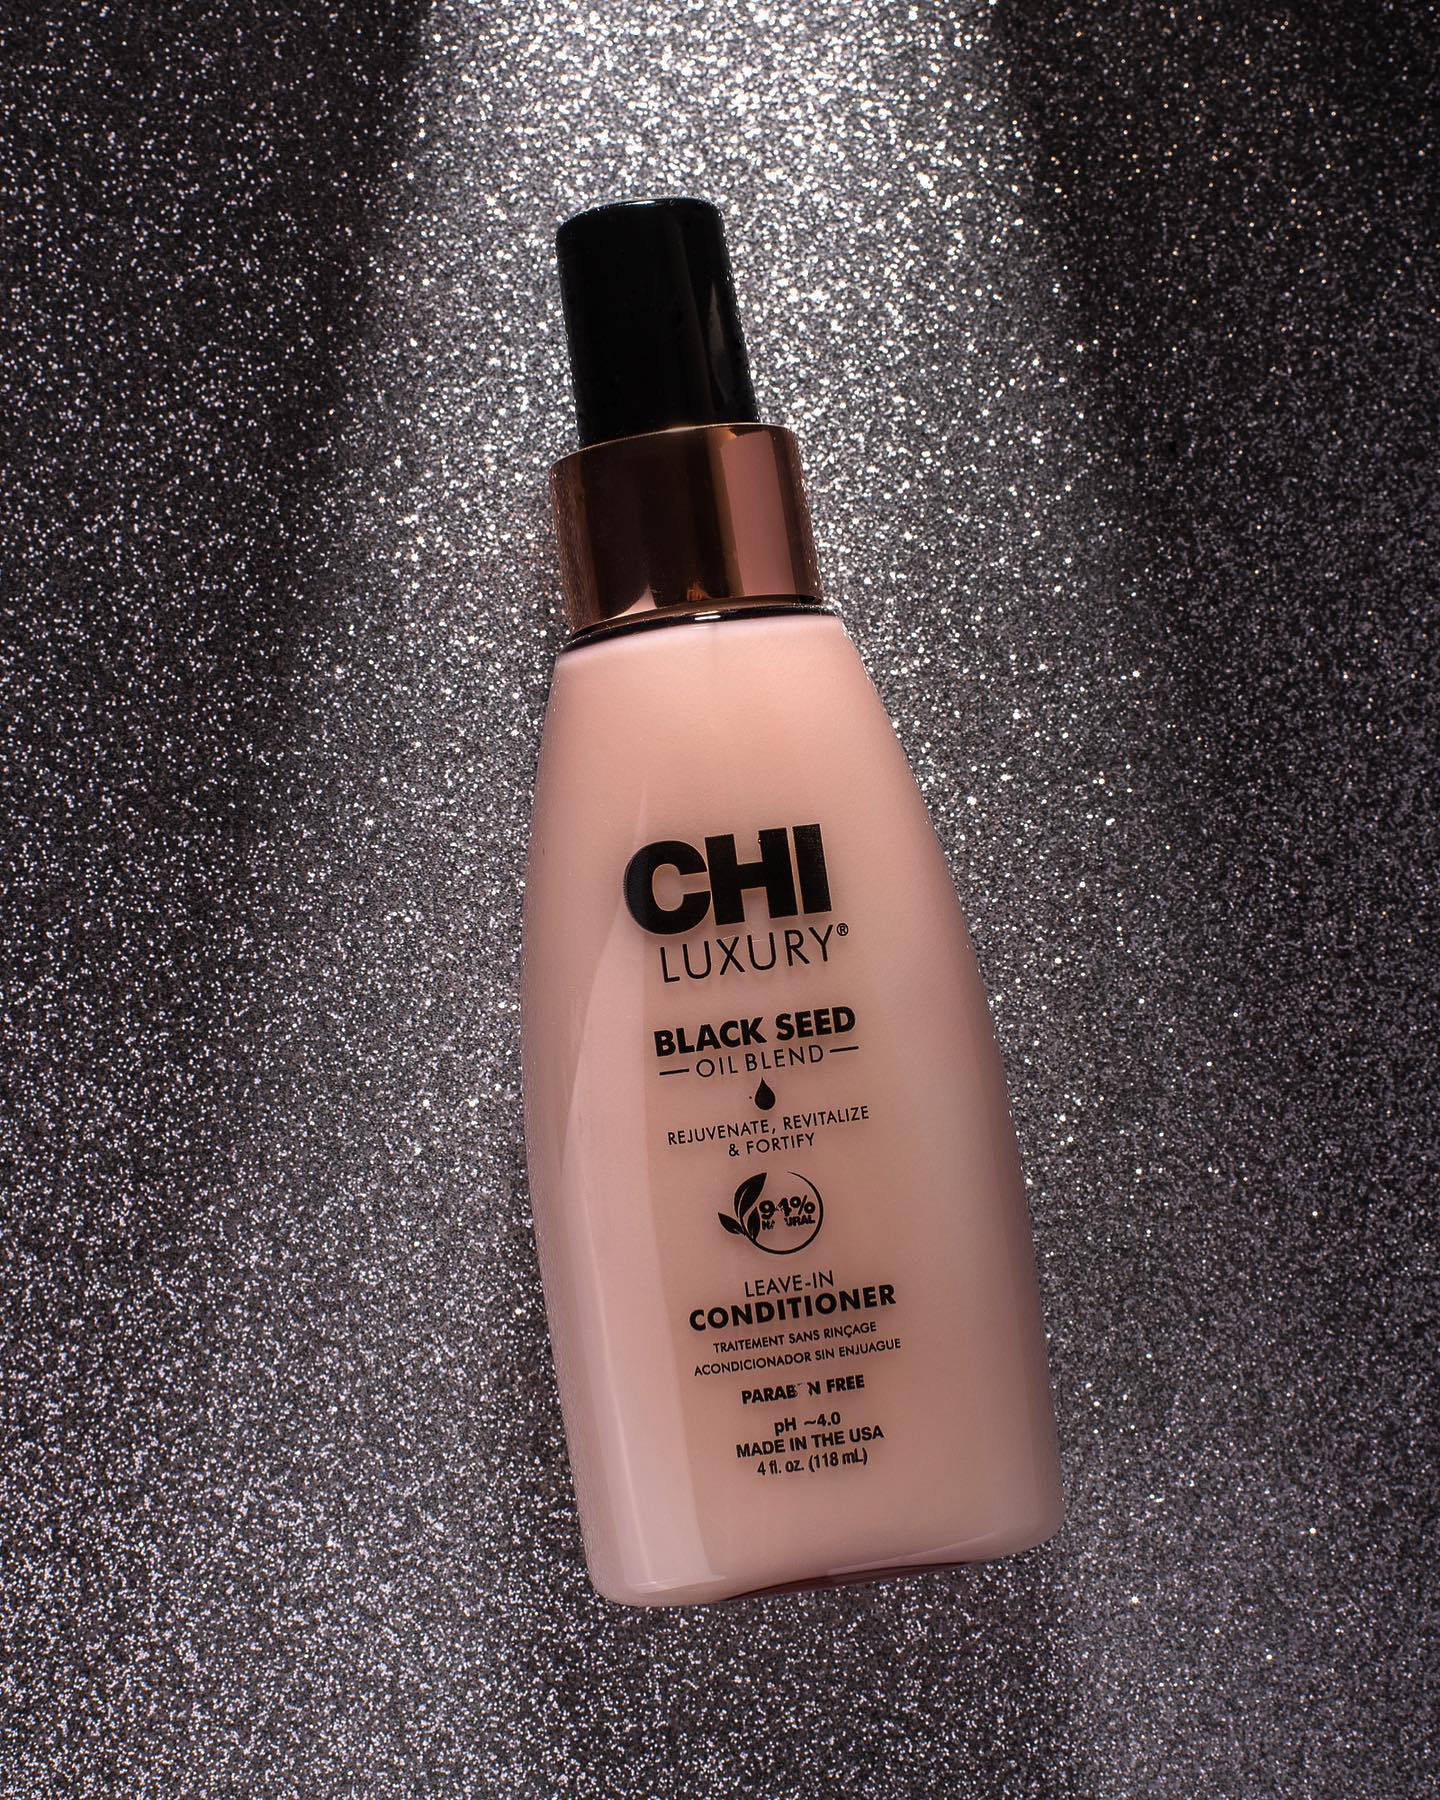 CHI LUXURY Black Seed Oil Leave-In Conditioner